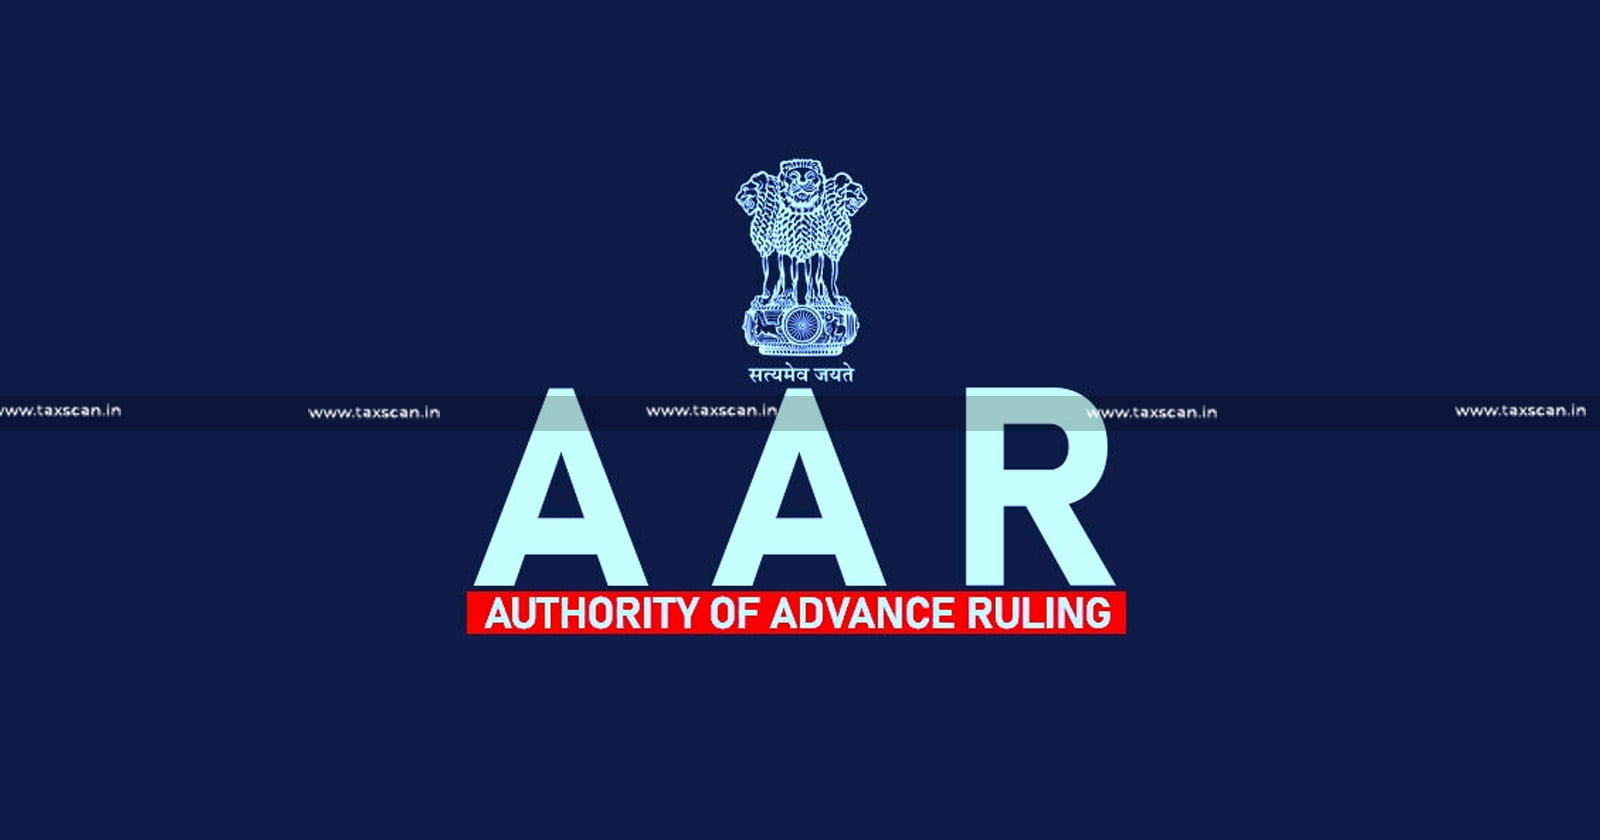 AAR - AAR West Bangal - AAR ruling on printing services - Government of Assam - Education Department - TAXSCAN